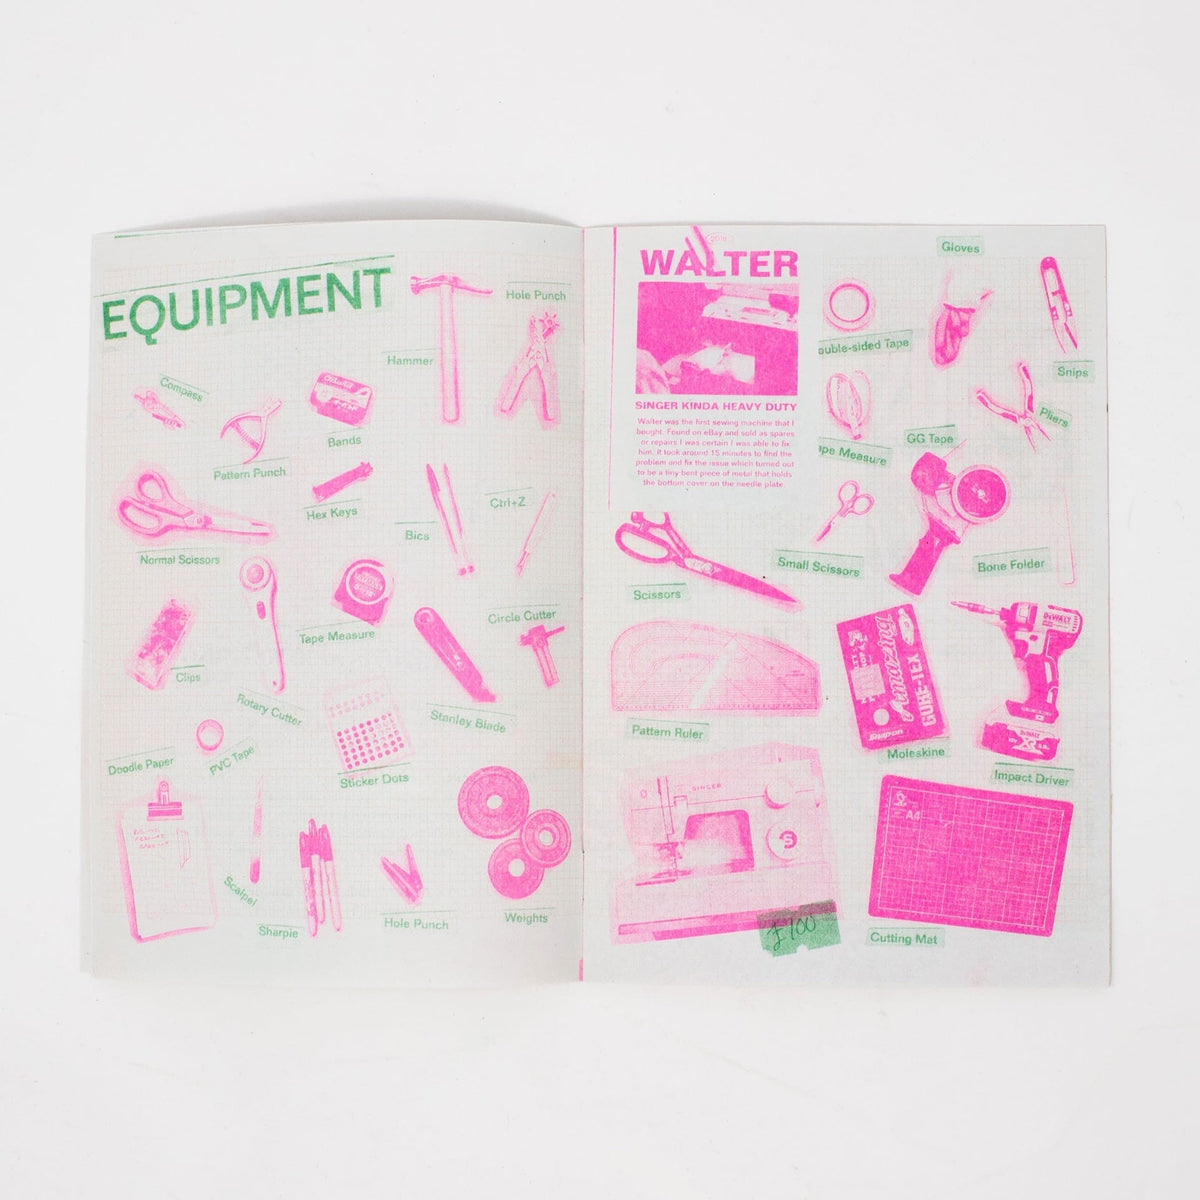 Hato Zines No. 34: How To DIY by Greater Goods